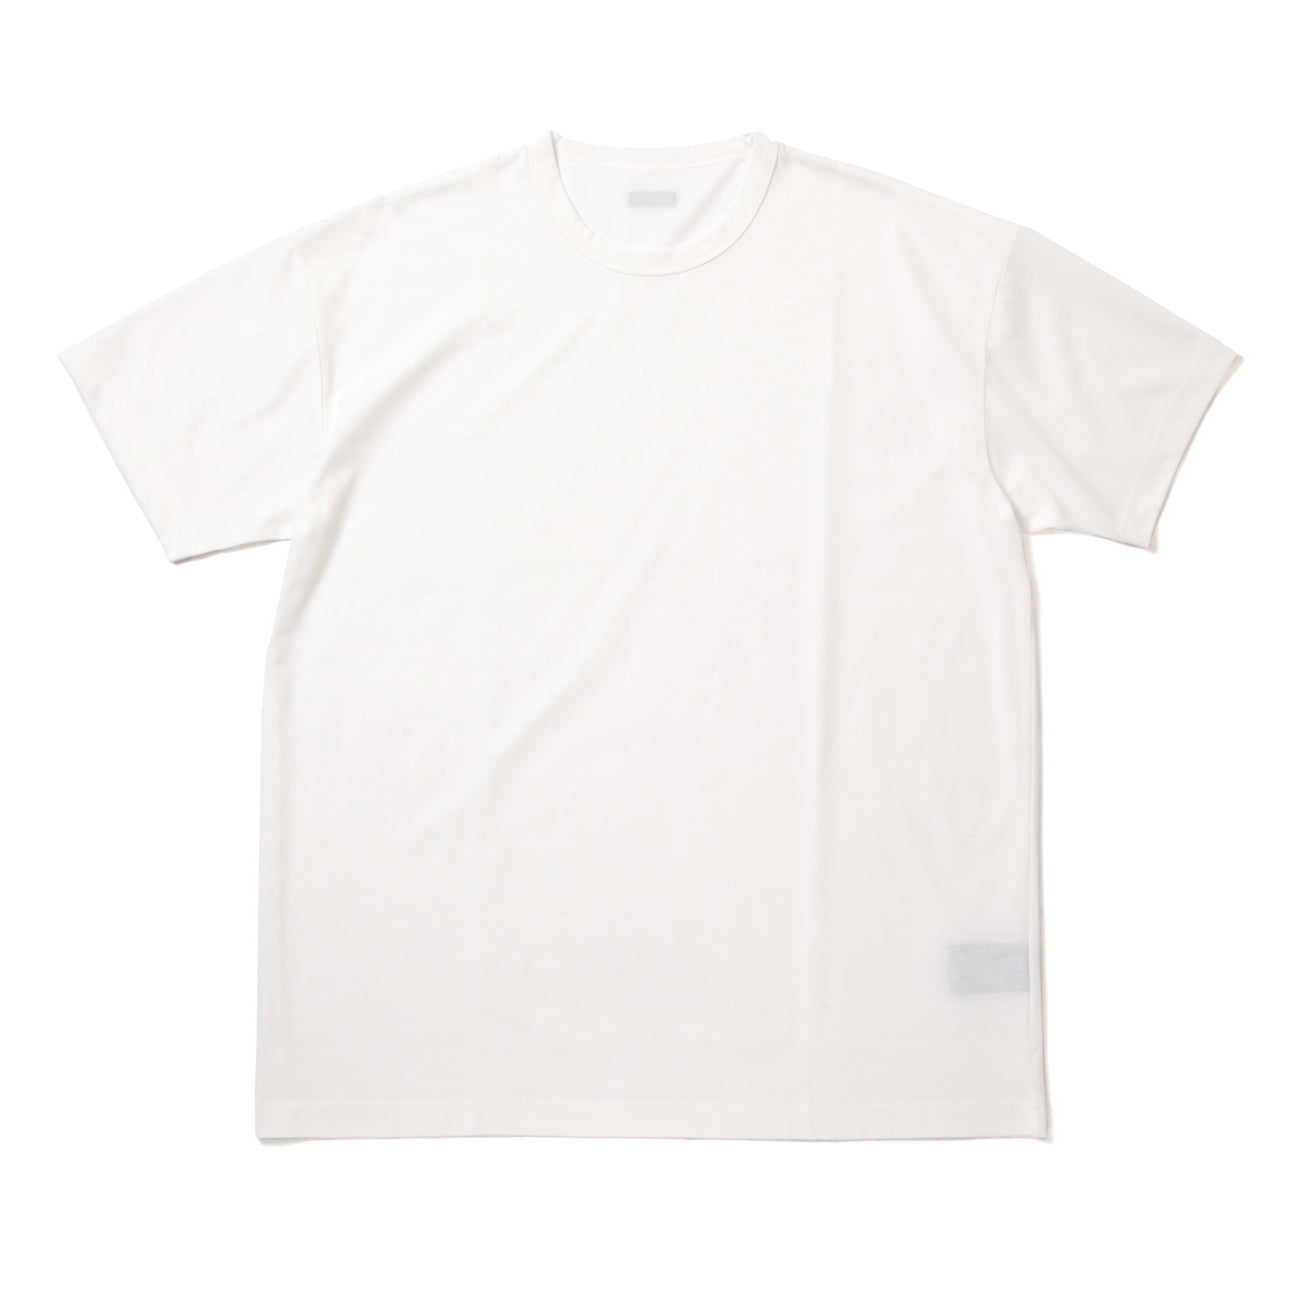 37.5 TECHNOLOGY RECYCLING S/S TEE